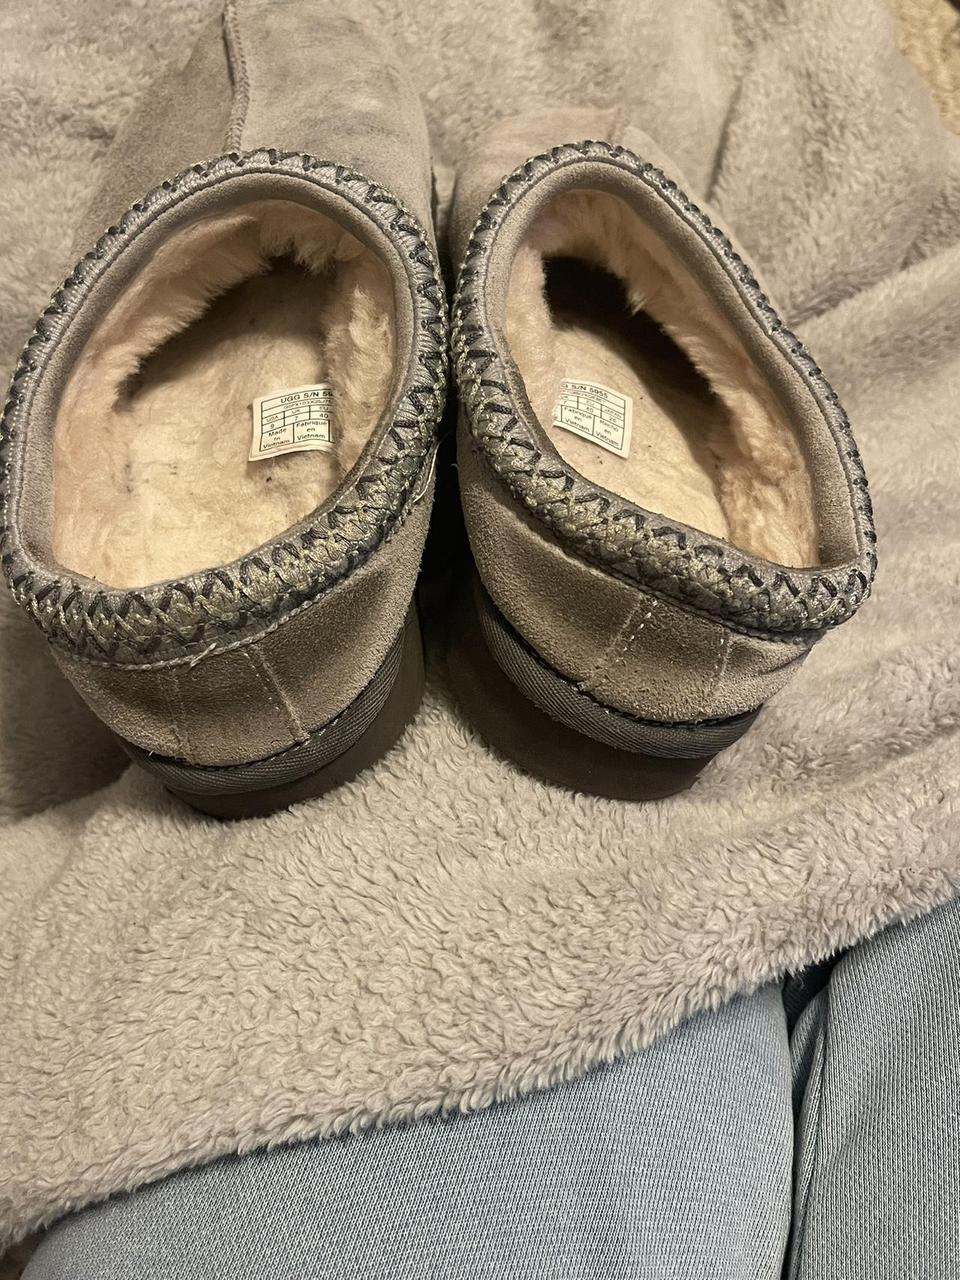 UGG Women's Grey and White Slippers (3)